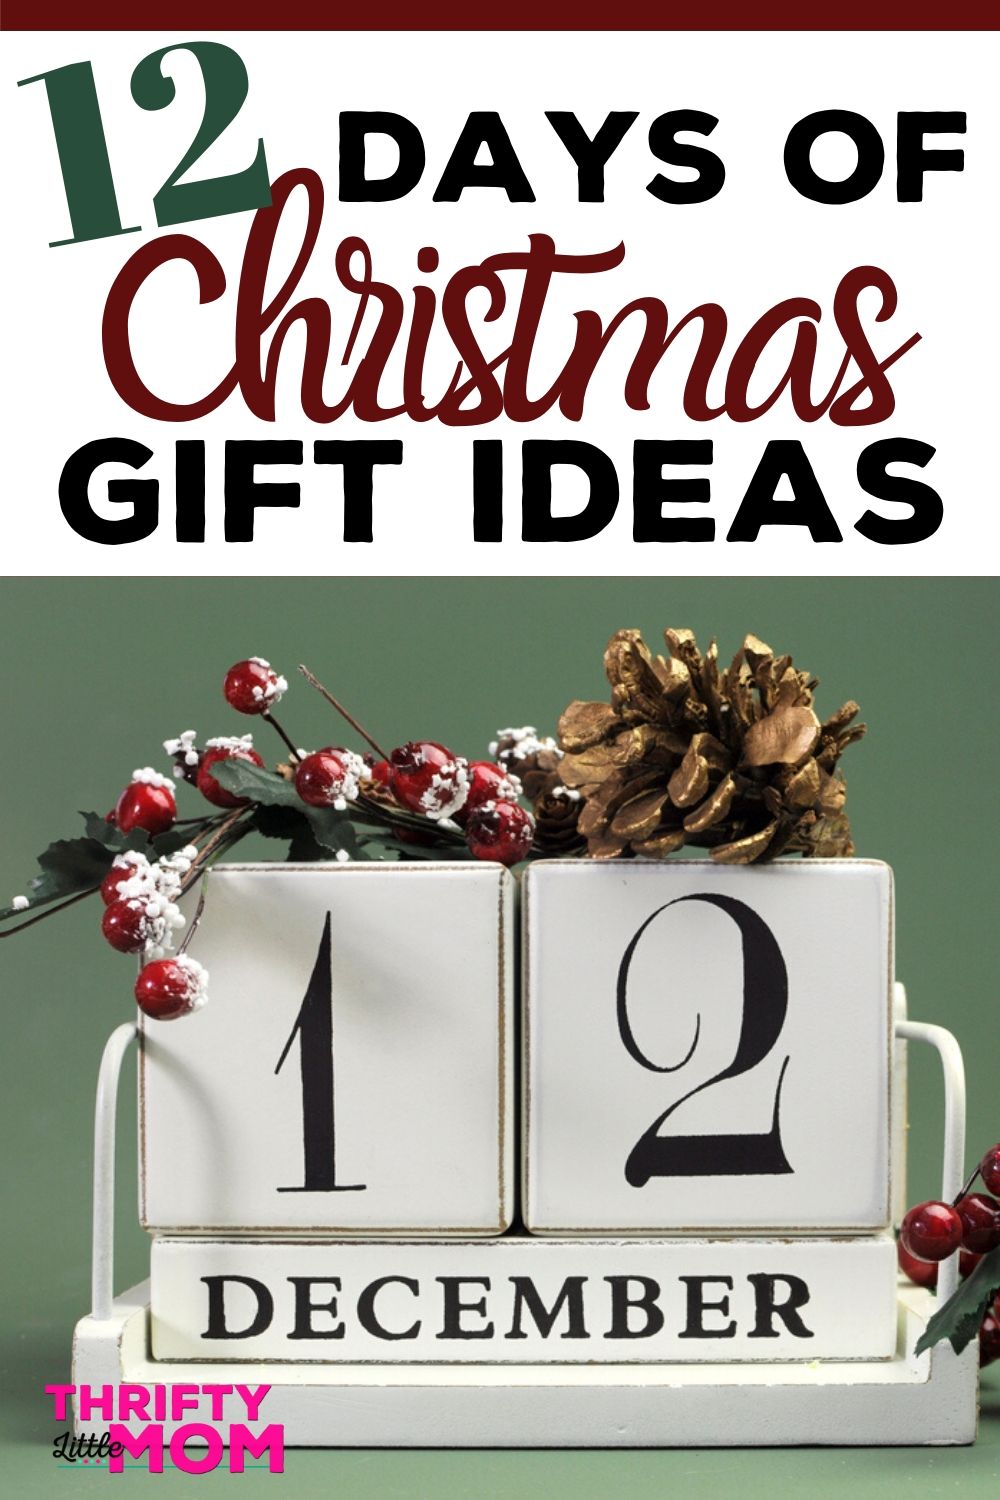 The 12 Days of Christmas Gift Ideas - The Days of Gifts